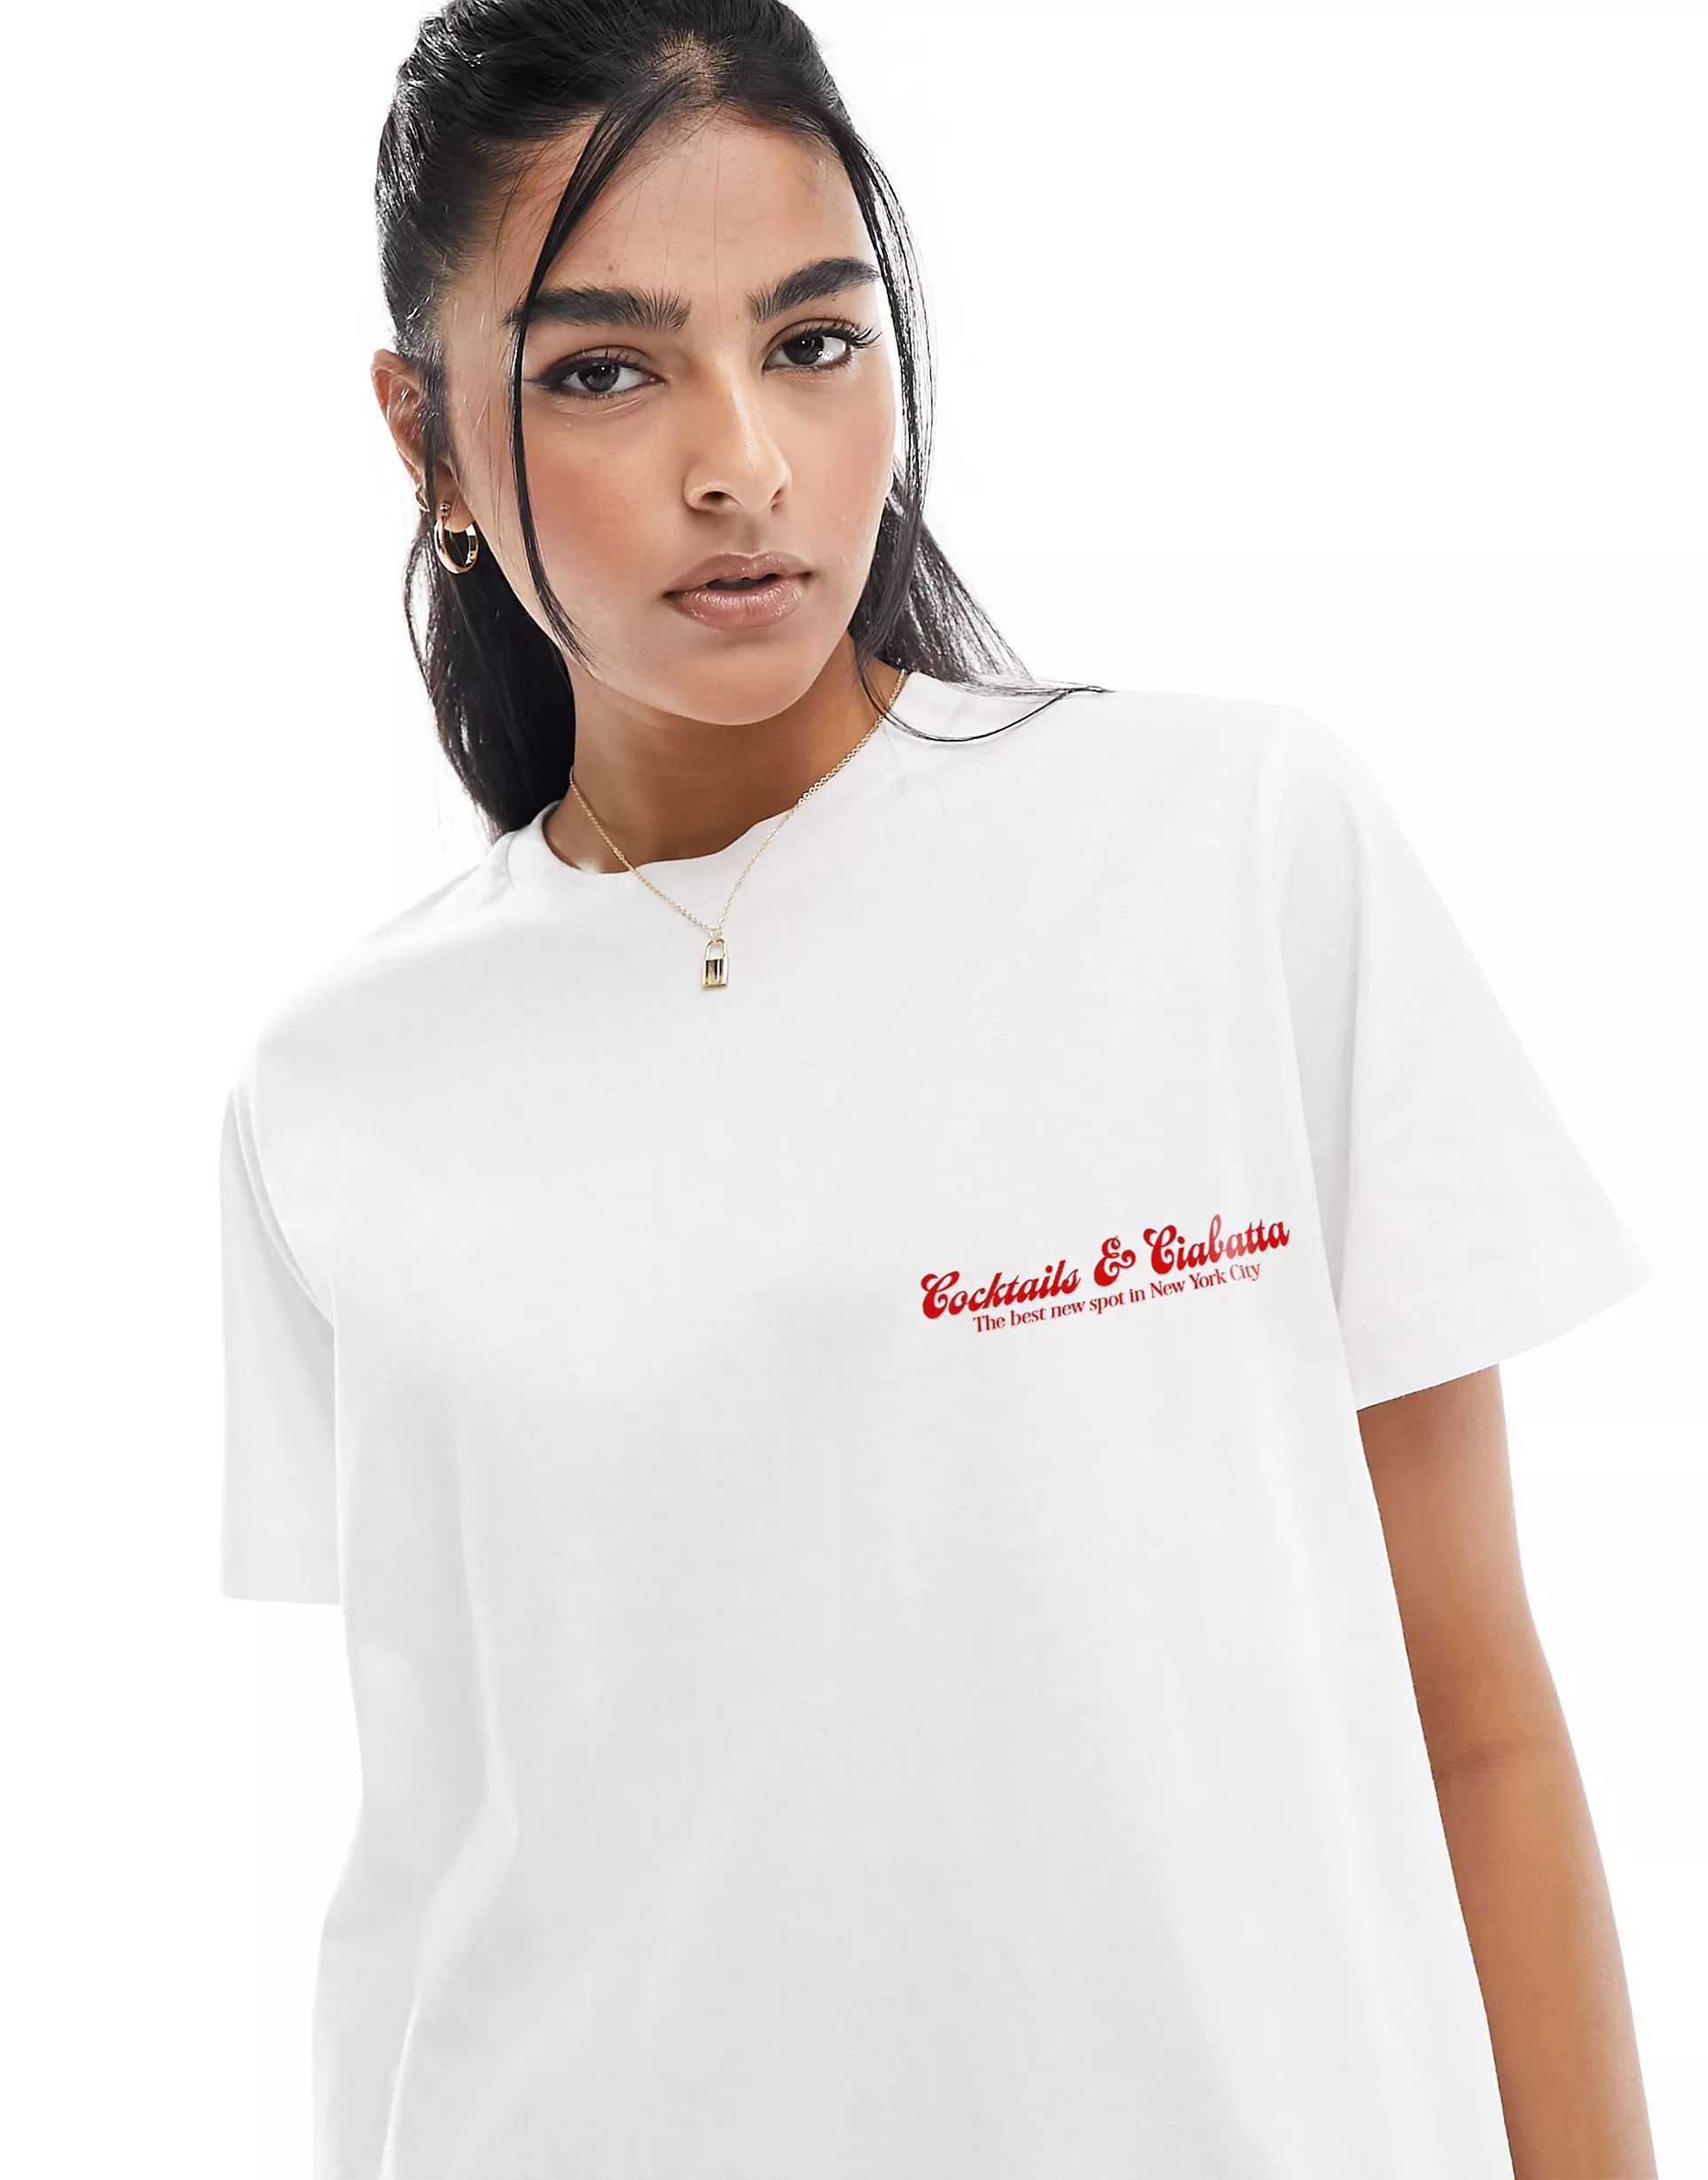 ASOS DESIGN boyfriend fit t-shirt with cocktails and ciabatta graphic in white | ASOS | ASOS (Global)